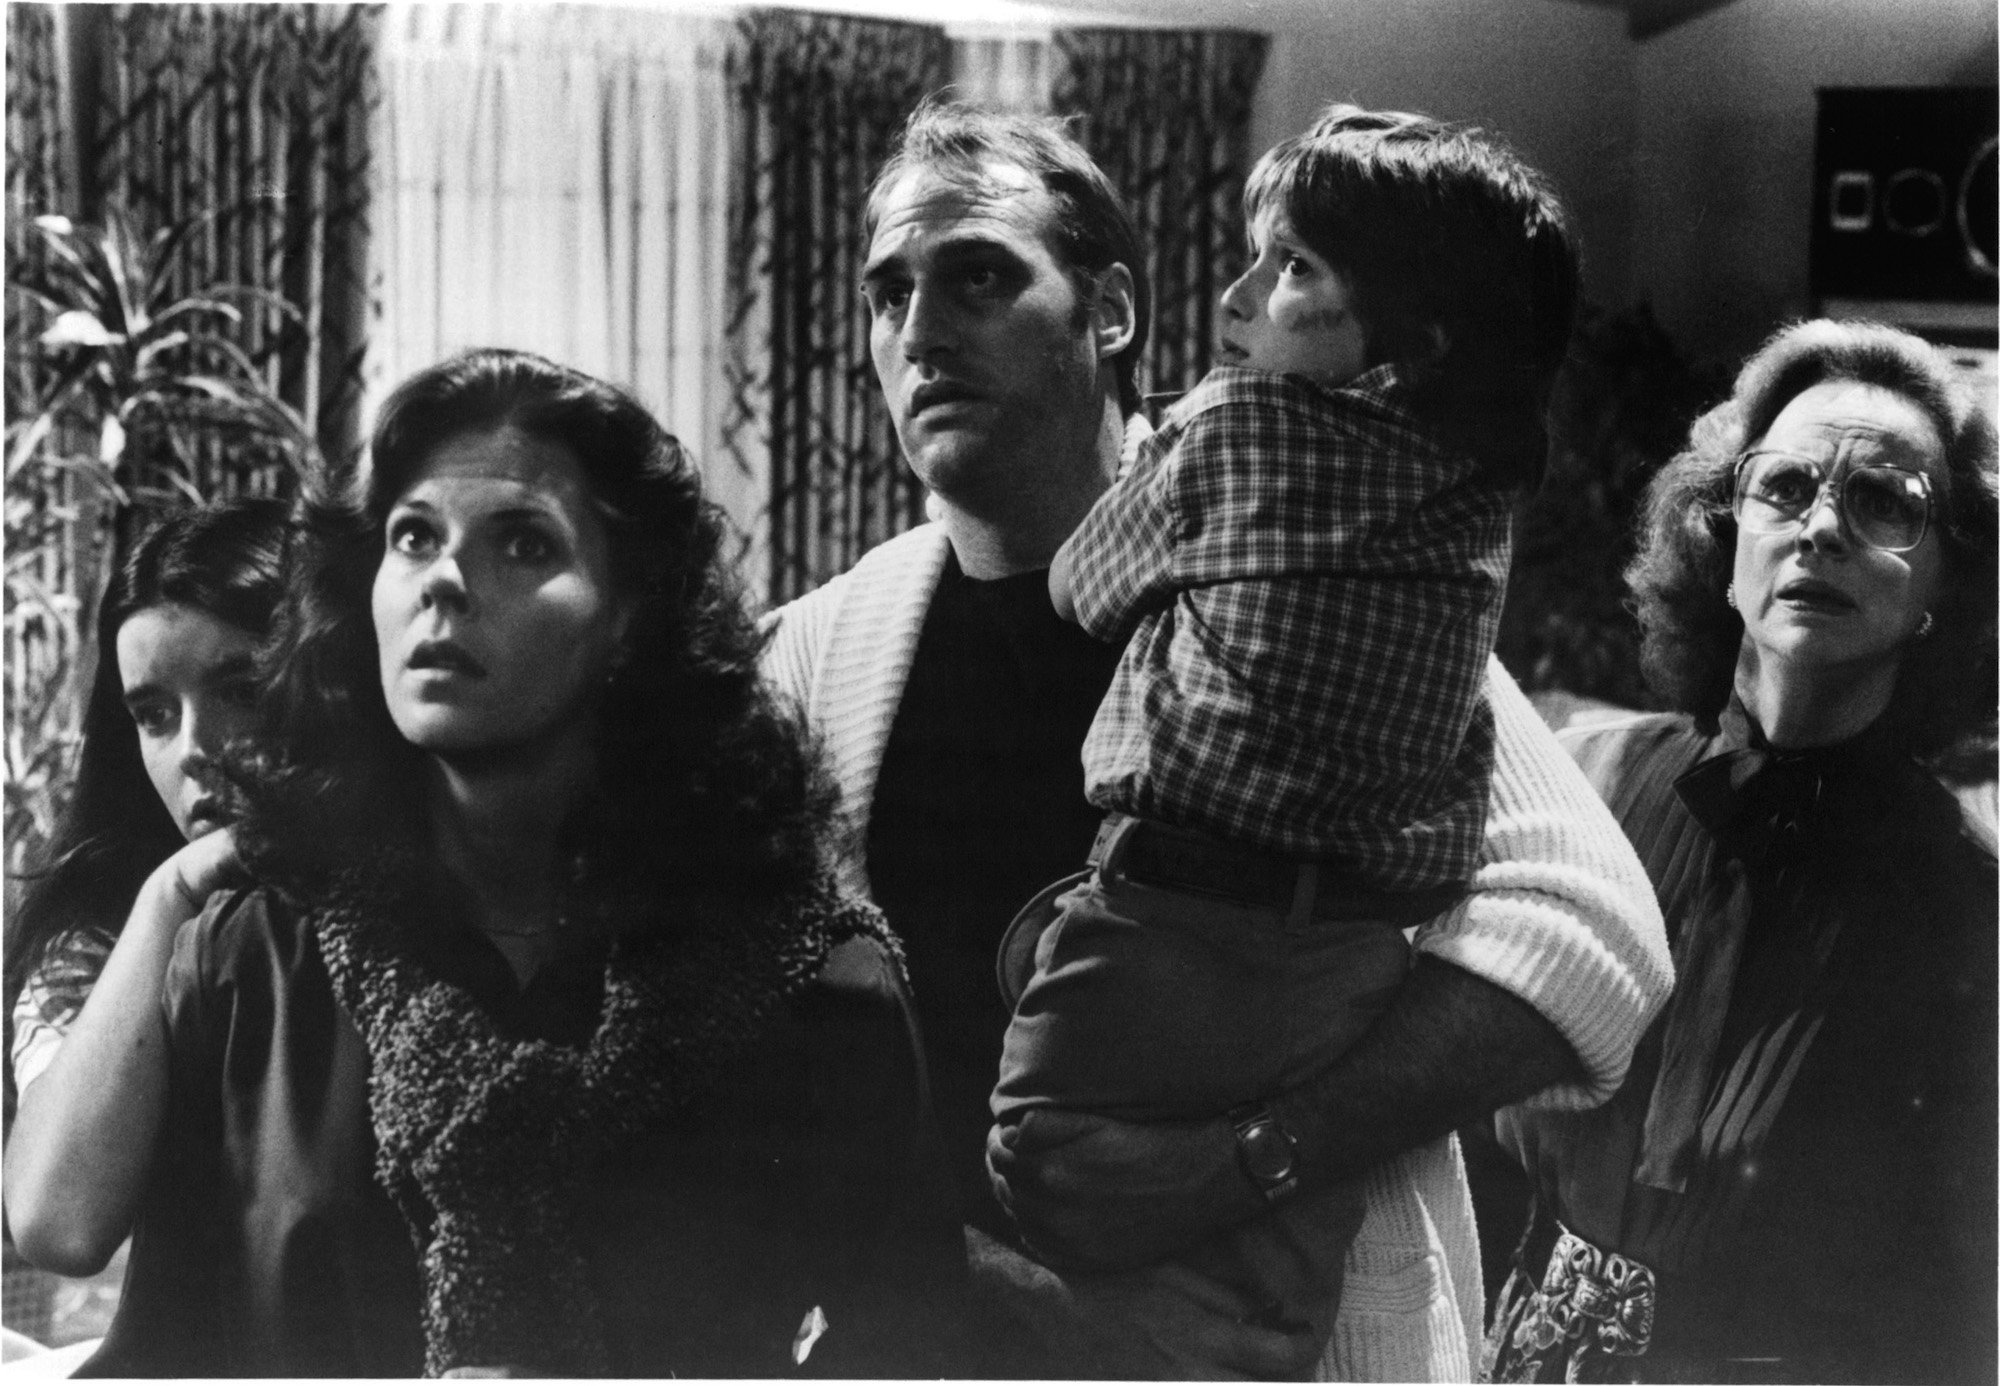 (L-R) Dominique Dunne, JoBeth Williams, Craig T Nelson, Oliver Robins and Beatrice Straight in a scene from the film 'Poltergeist', 1982.